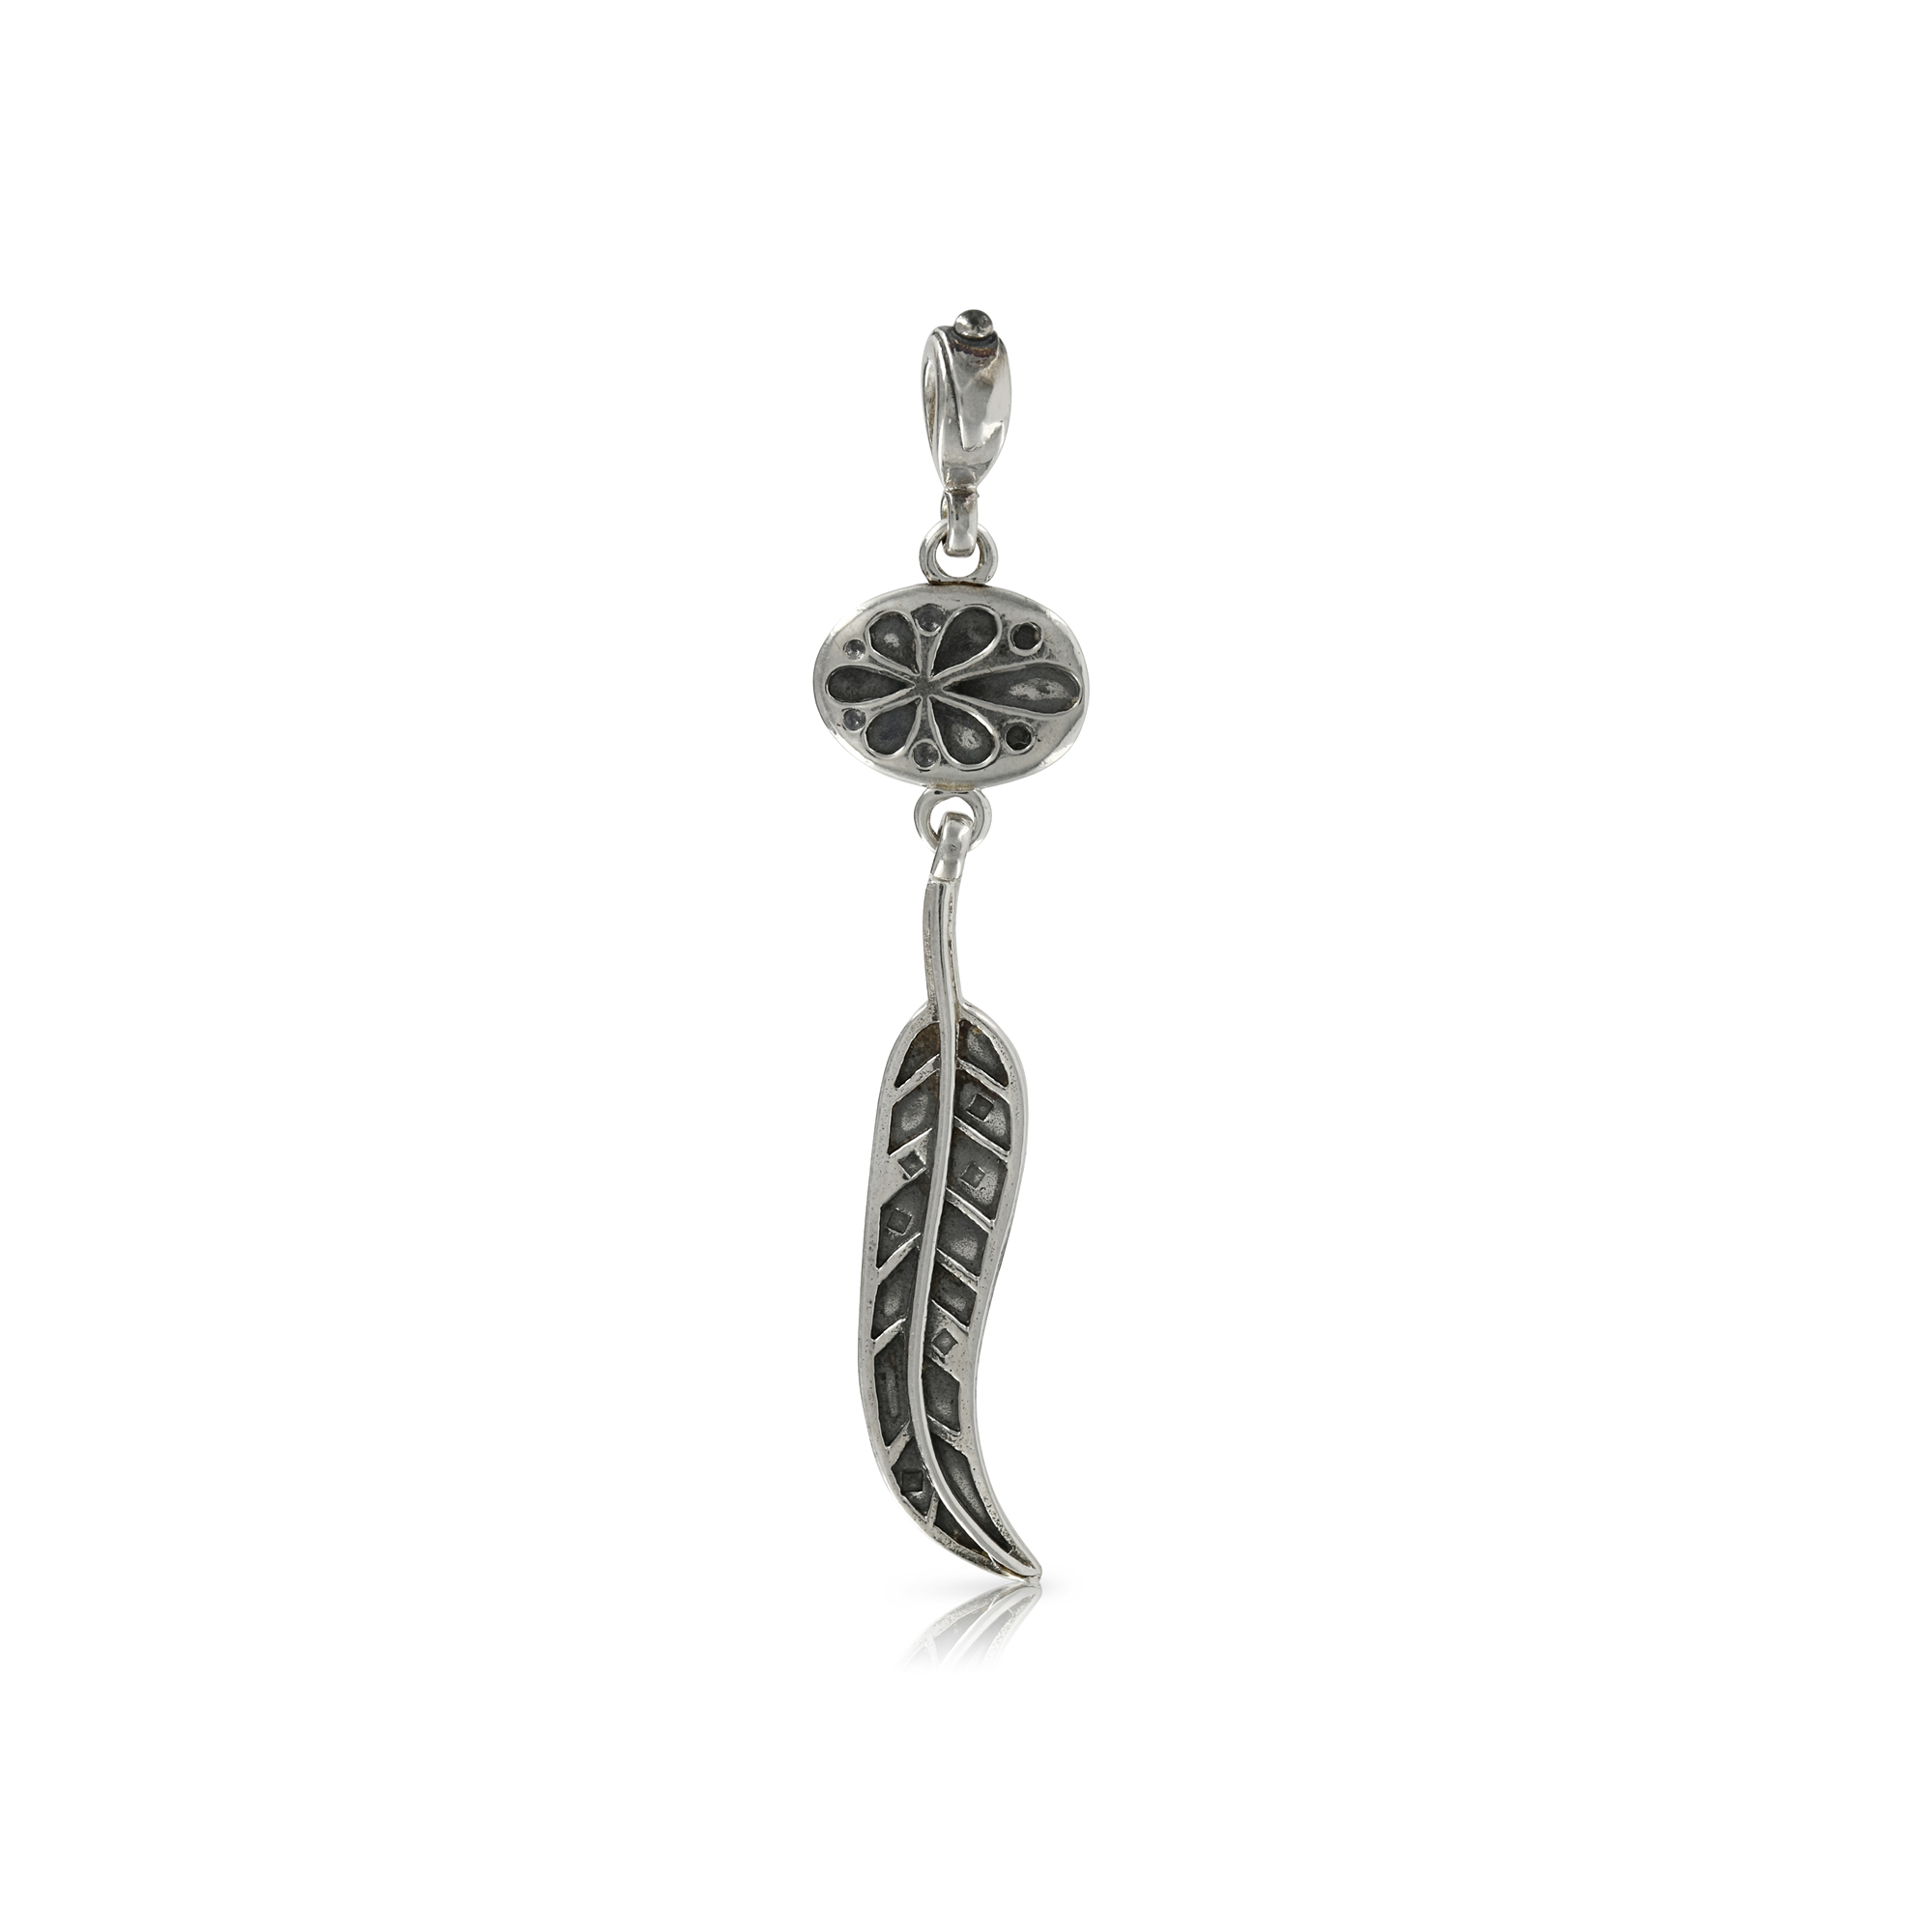 Feather and Oval Pendant back.